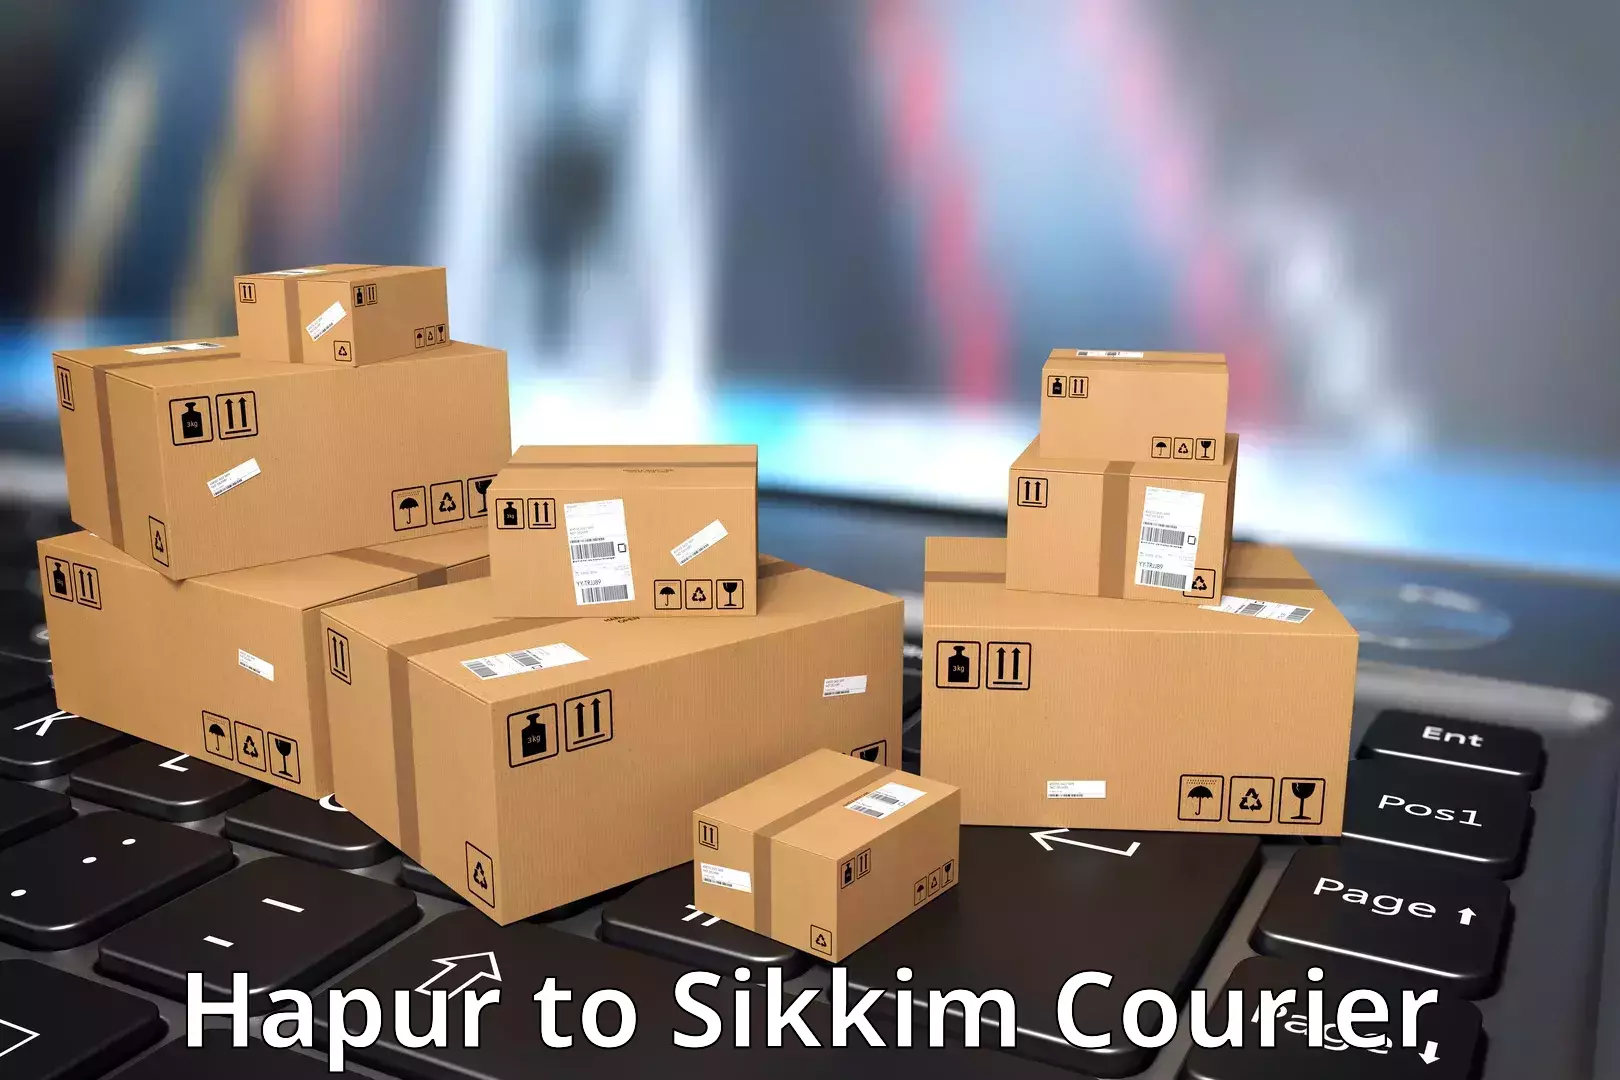 User-friendly courier app Hapur to Pelling